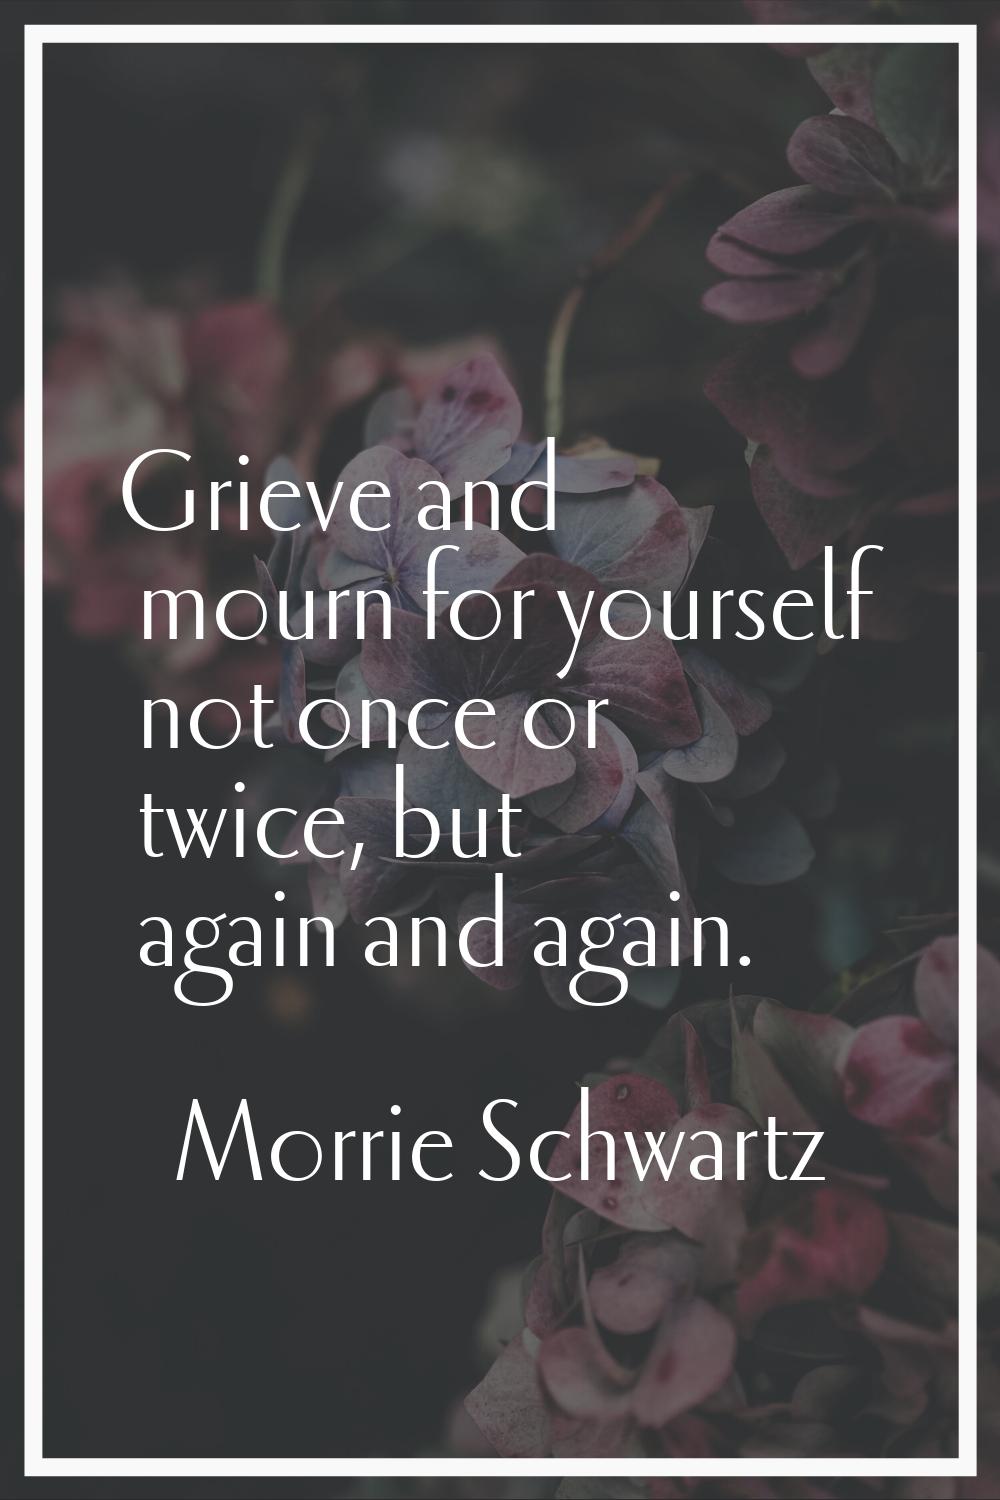 Grieve and mourn for yourself not once or twice, but again and again.